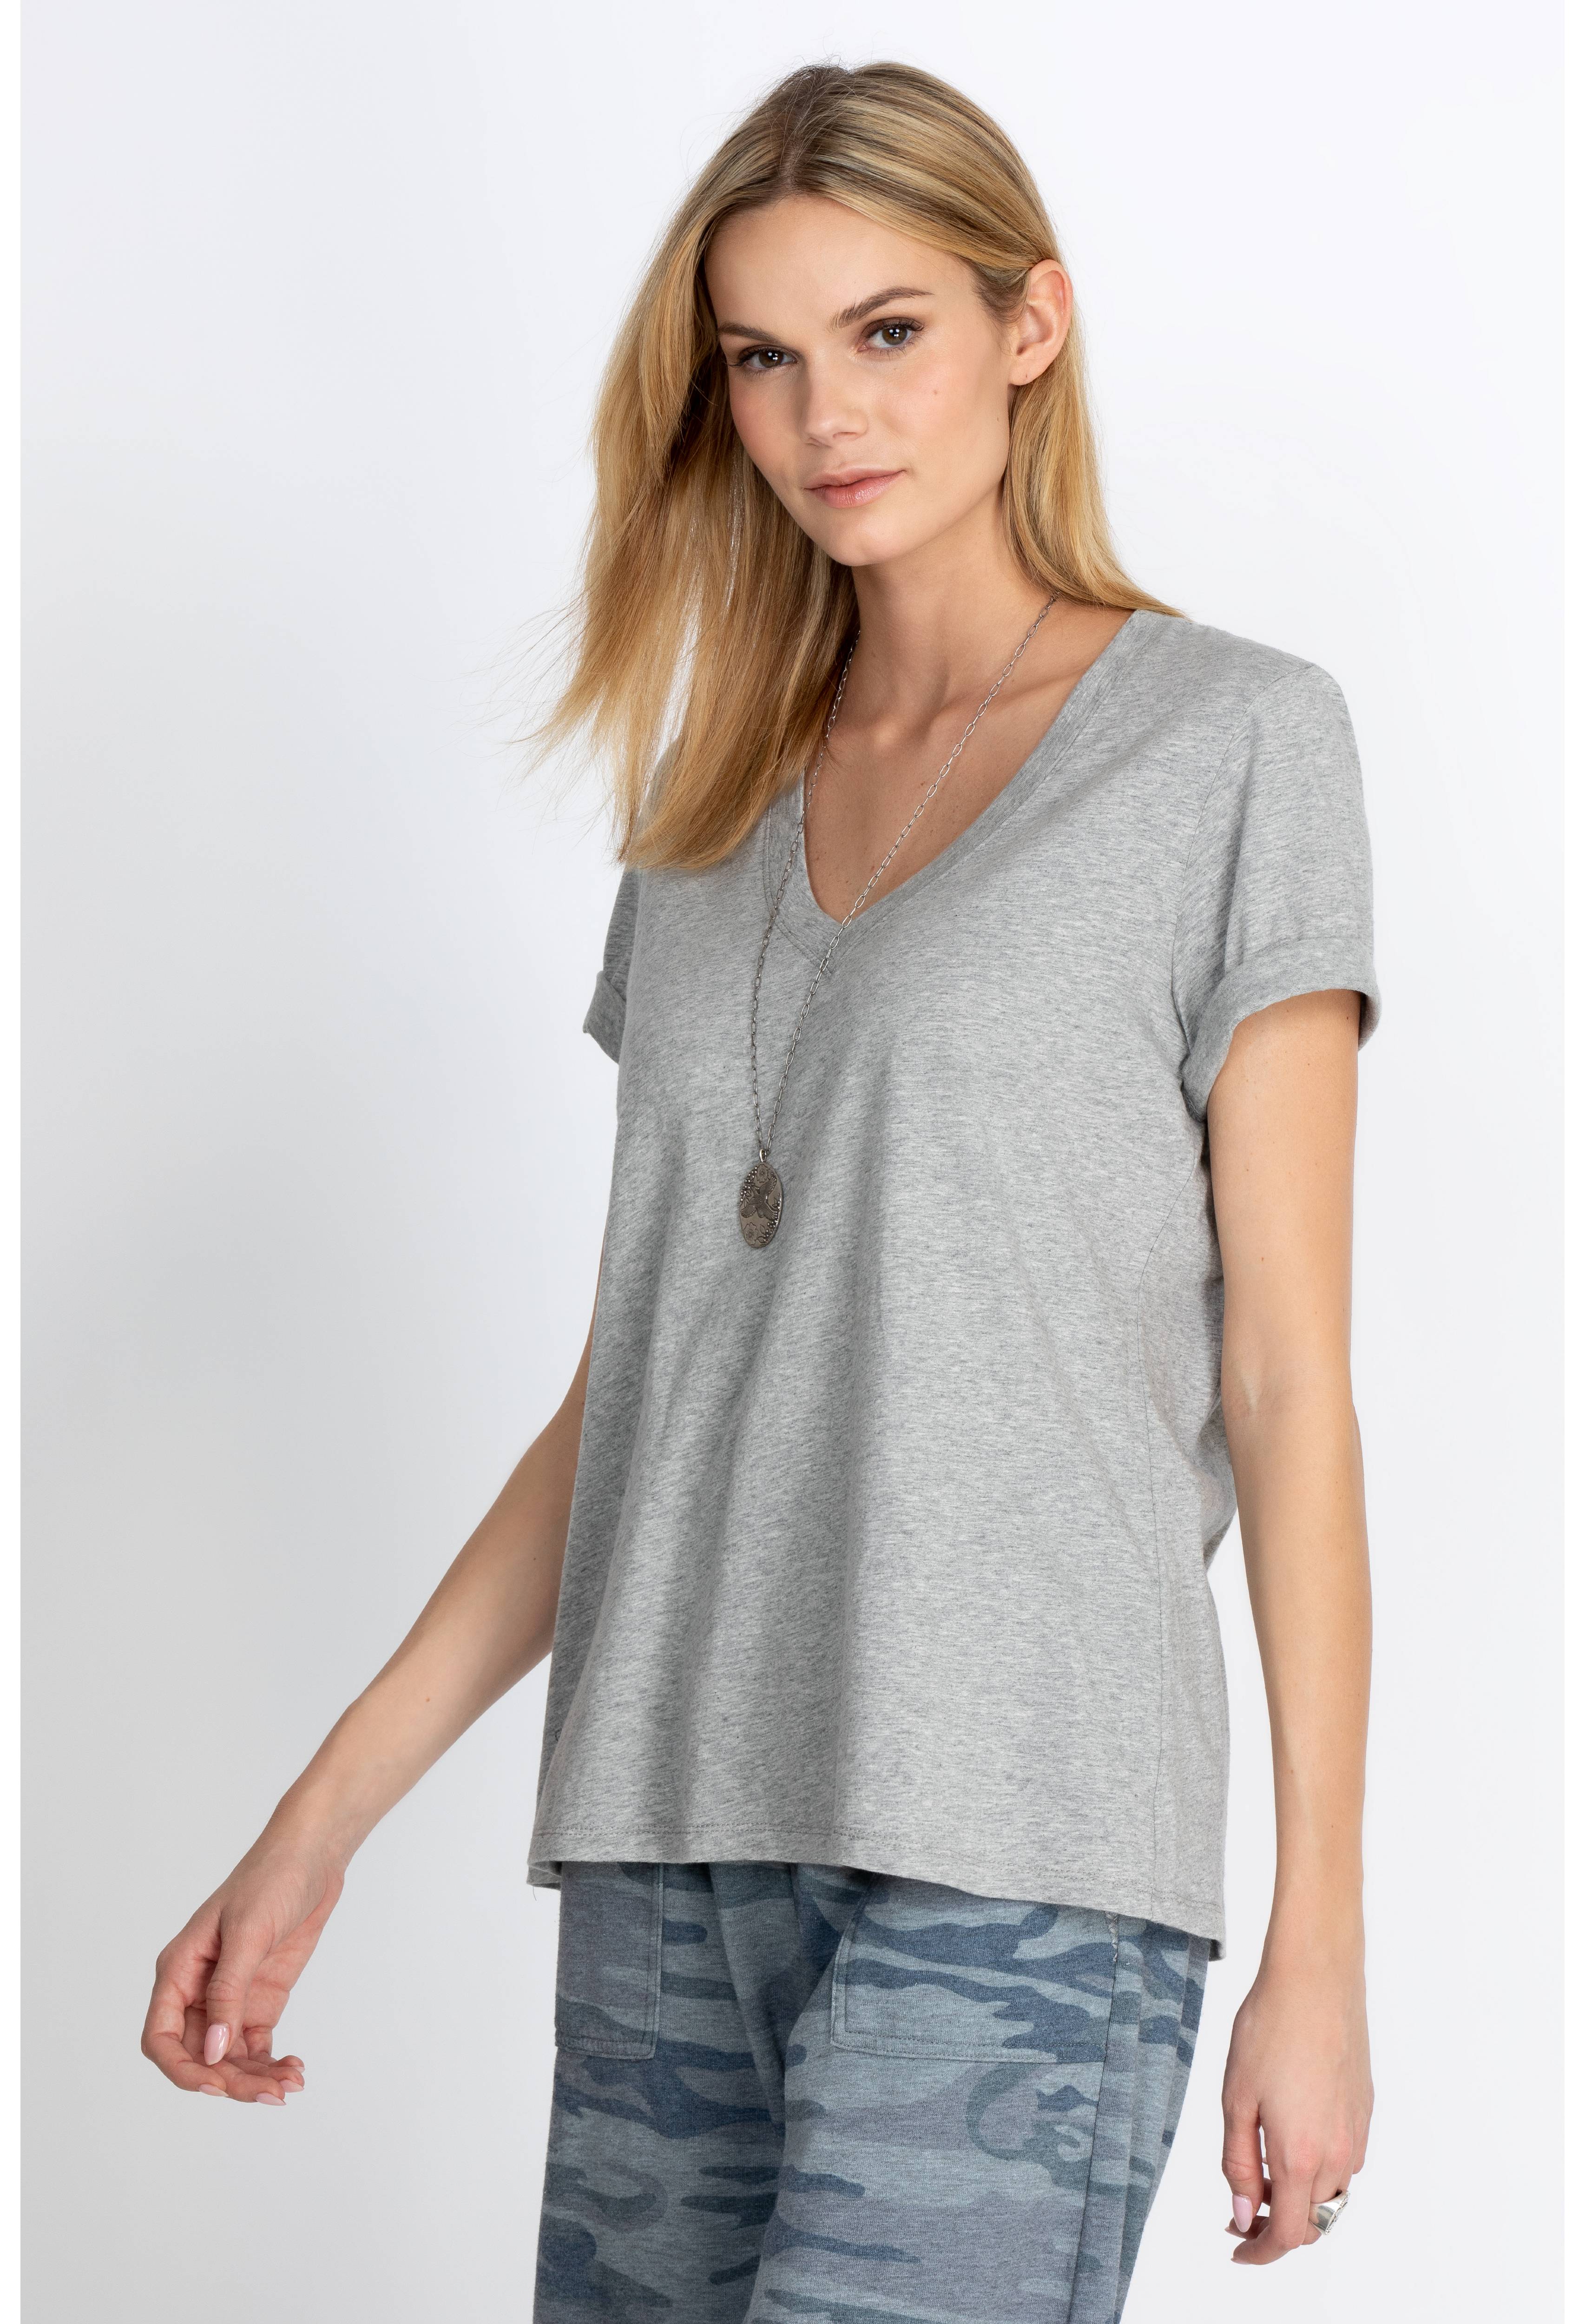 S/S V-Neck Layering Tee, , large image number 2